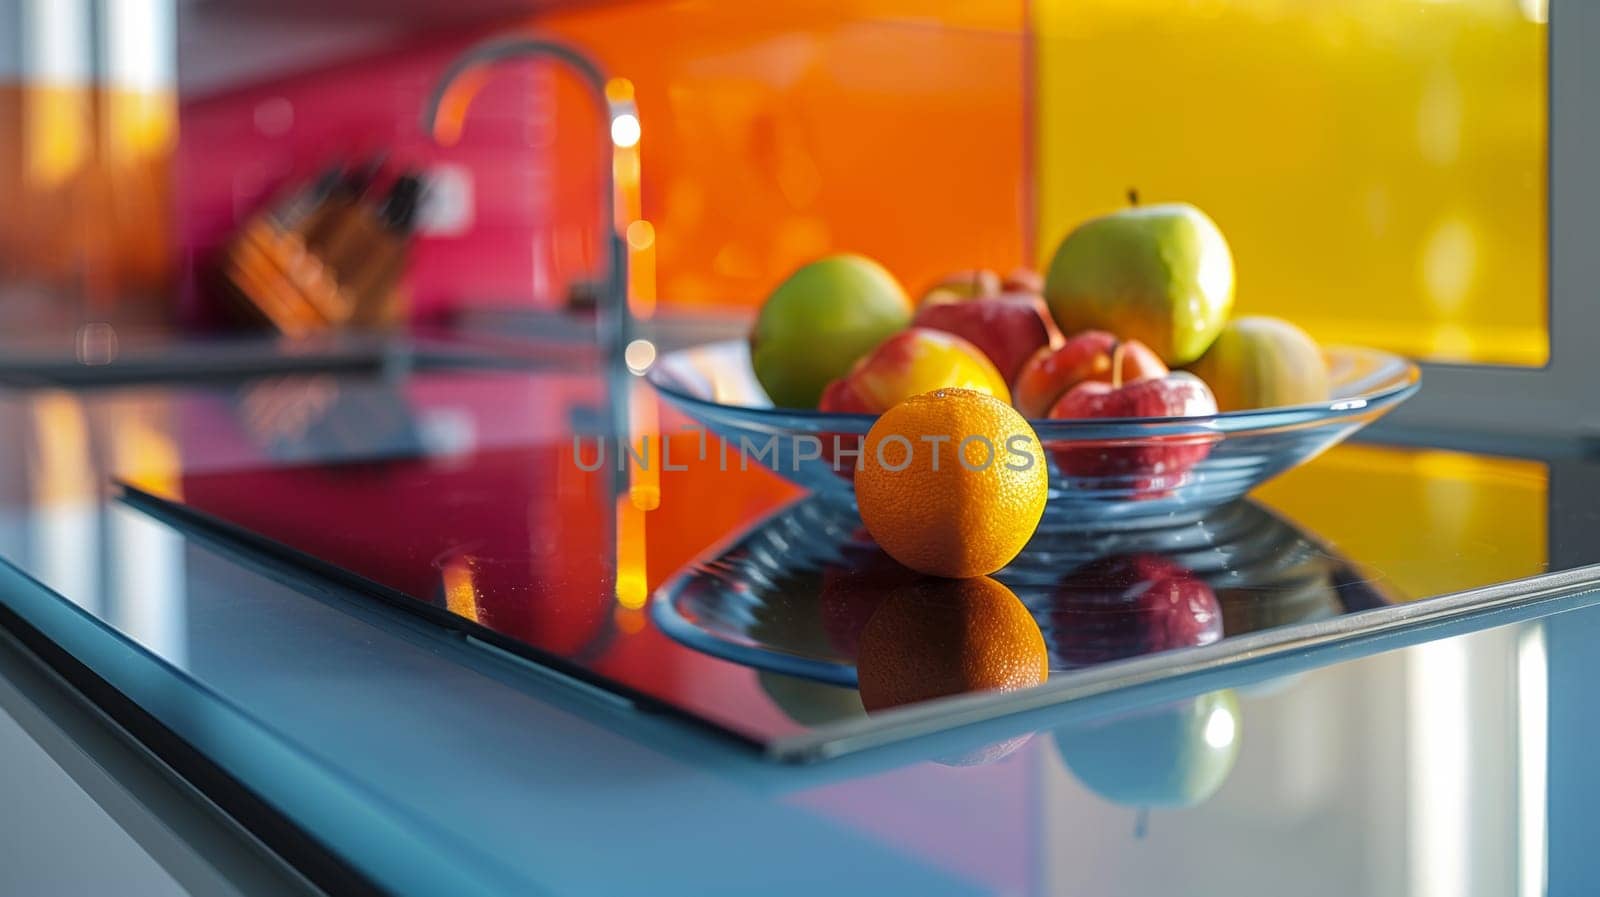 A bowl of fruit on a glass counter top with an orange